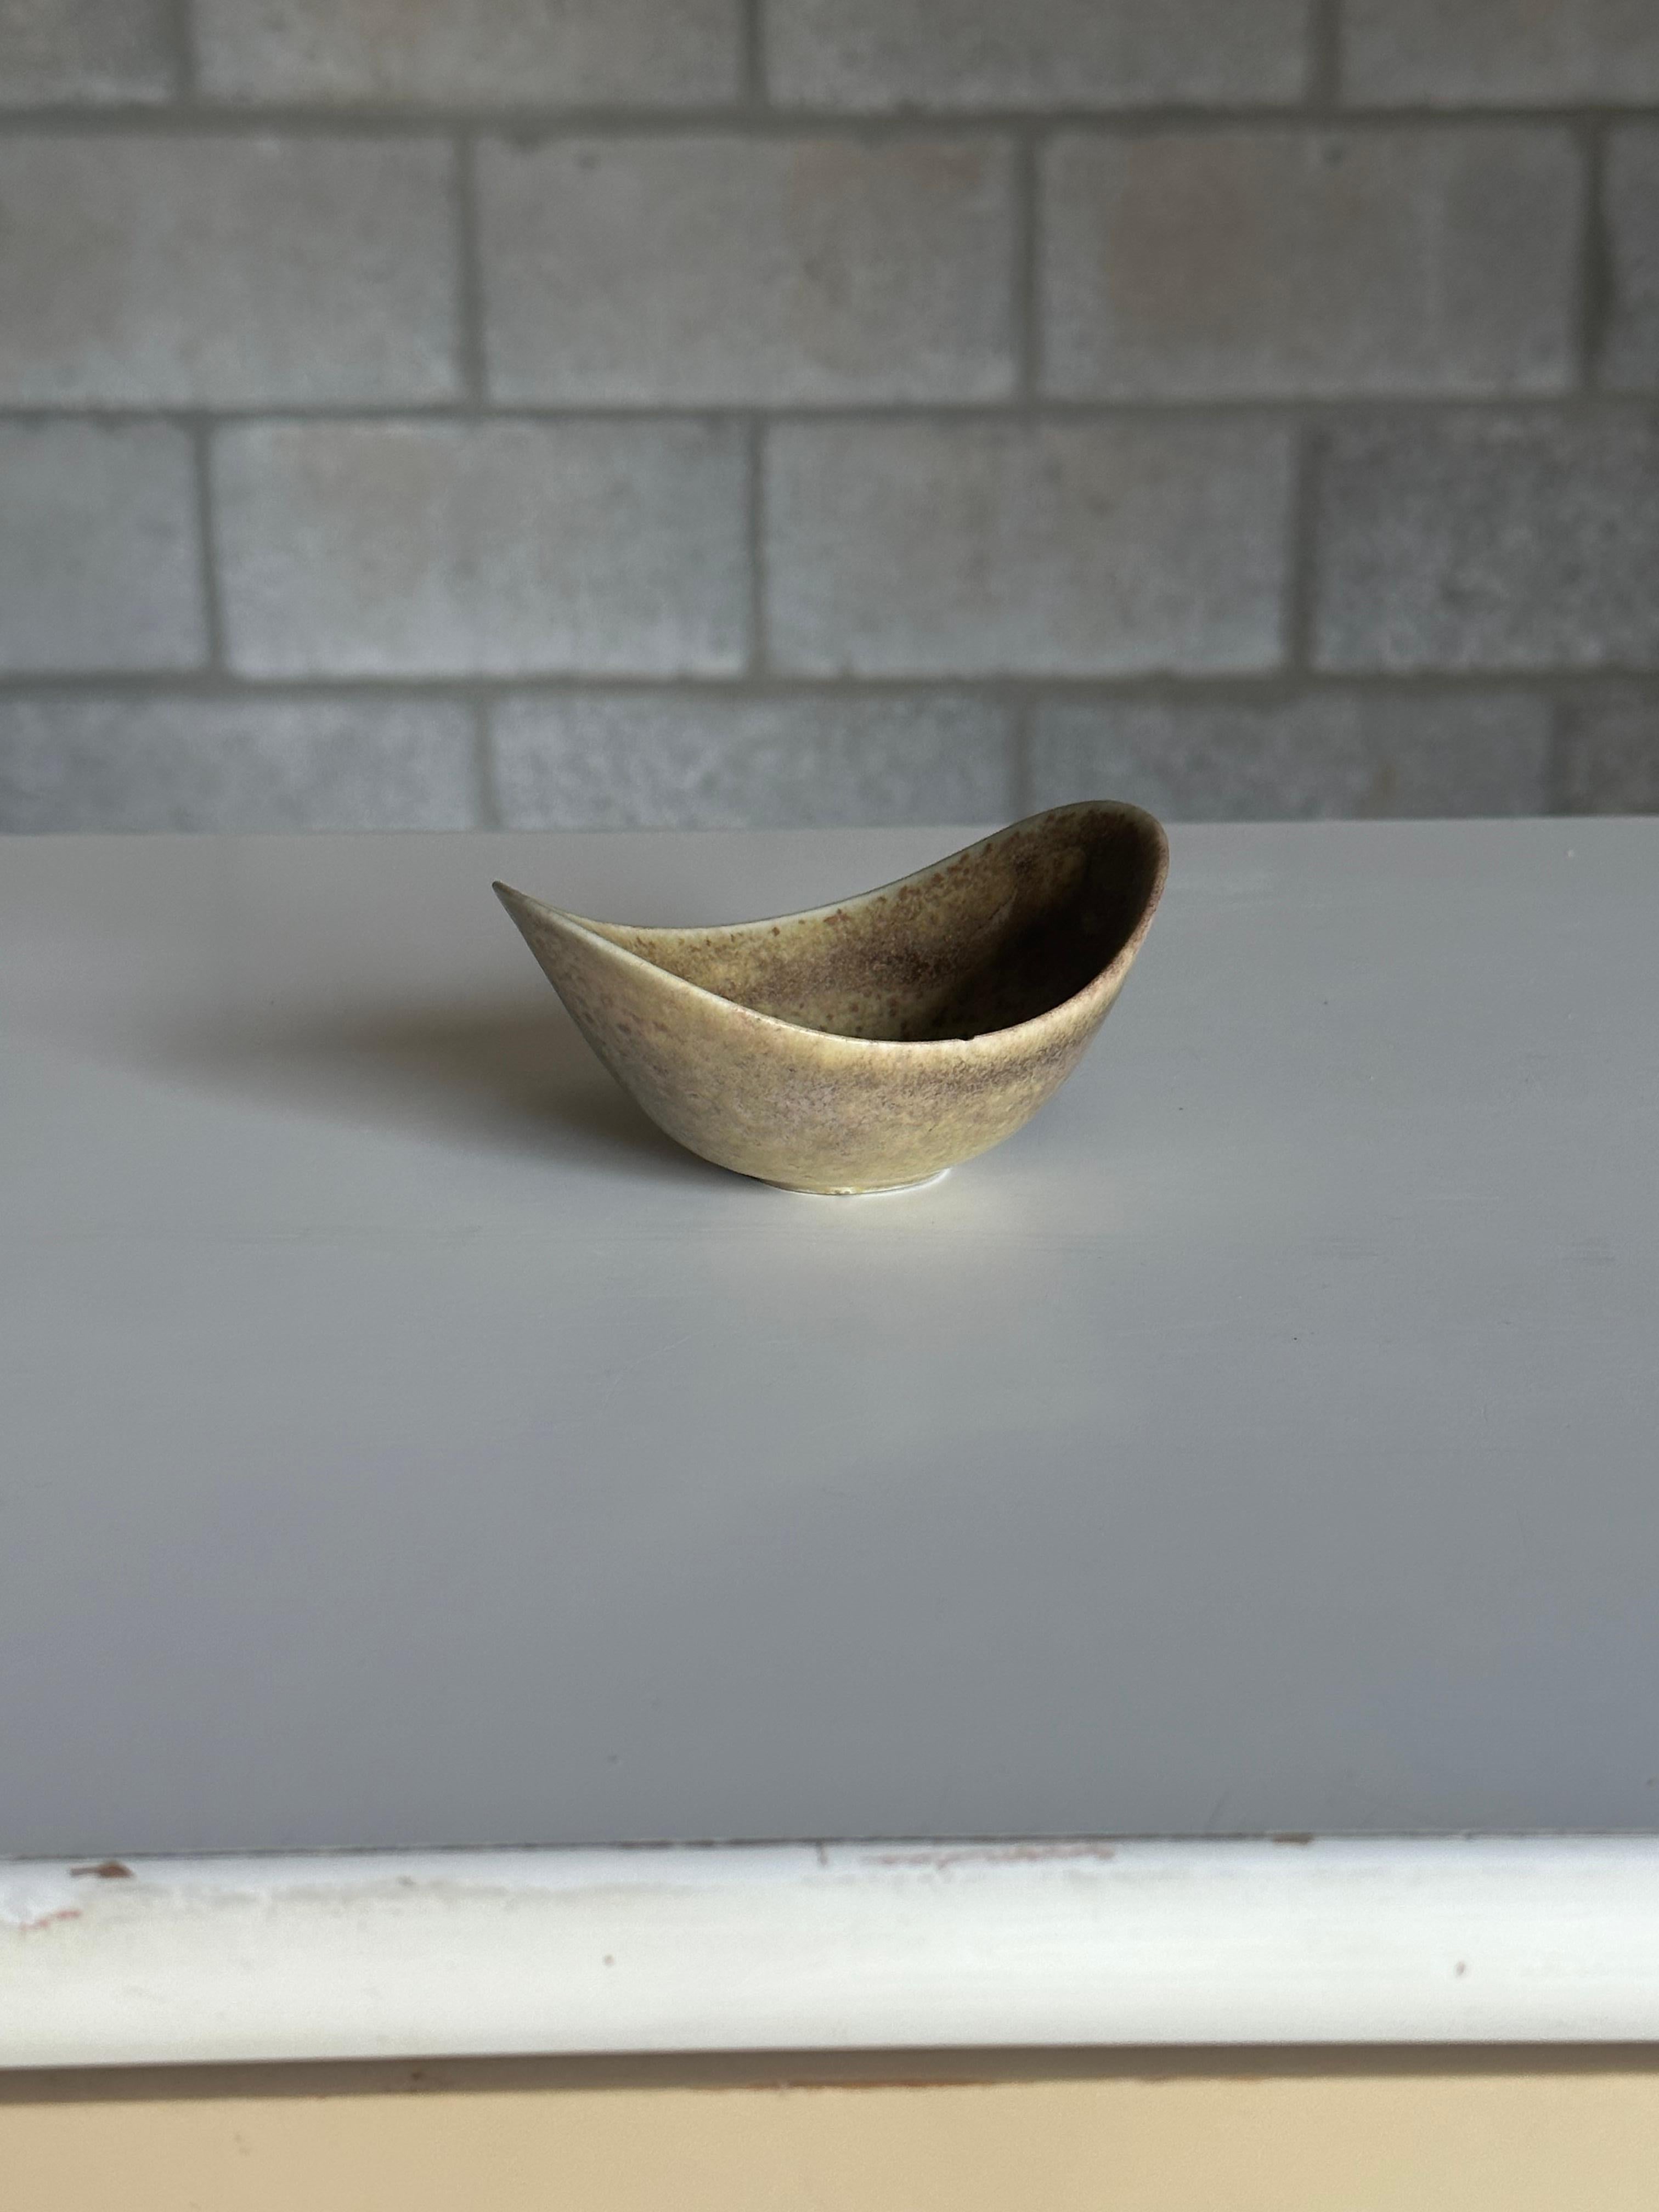 Small decorative bowl designed by Gunnar Nylund for Rörstrand. Would work well to hold change, earrings, rings, etc. Great color and unique shape.